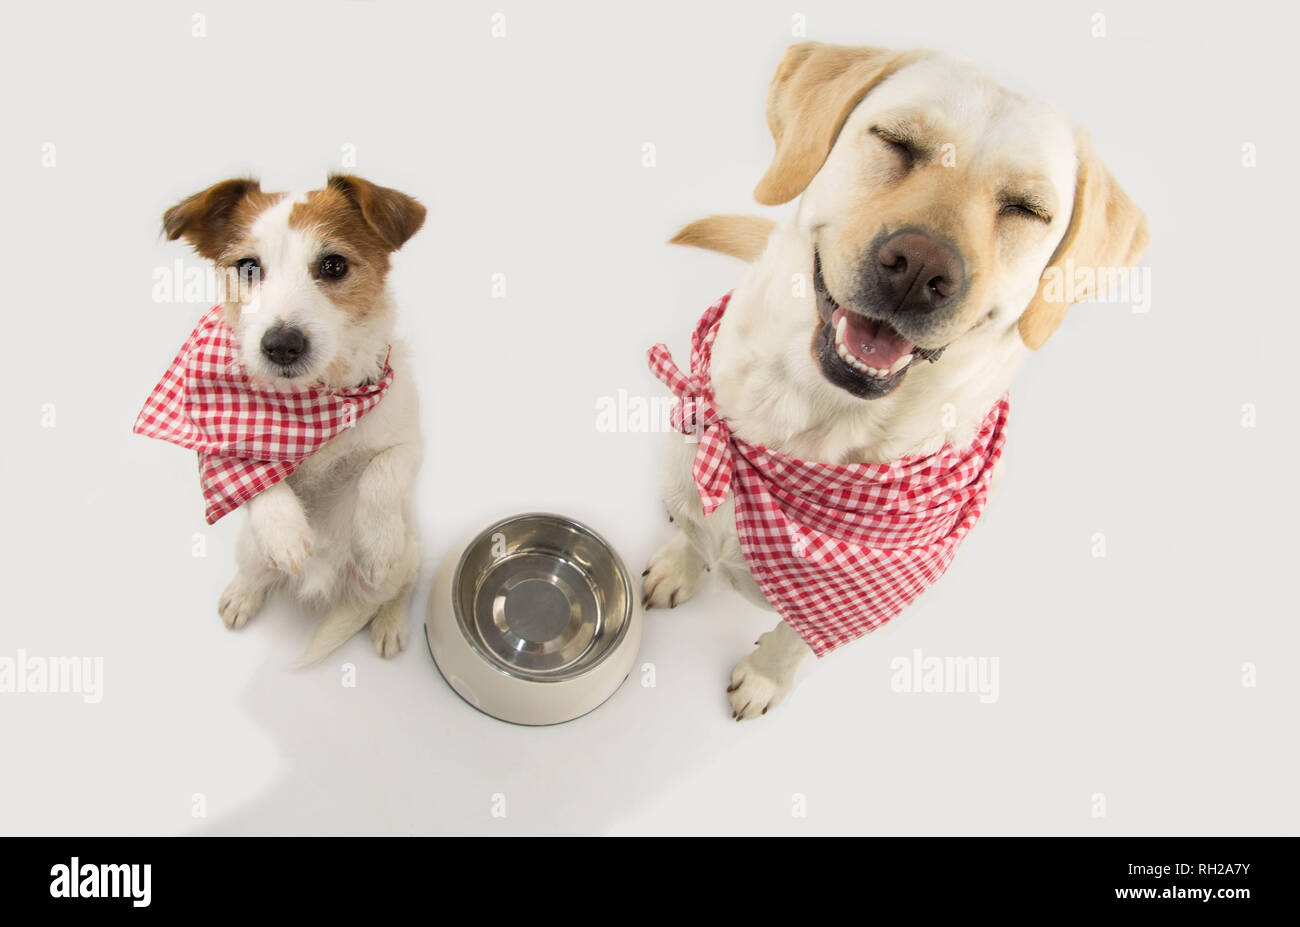 TWO DOGS BEGGING FOOD. LABRADOR AND JACK RUSSELL WAITING FOR EAT WITH A EMPTY BOWL. CLOSED EYES STANDING ON TWO LEGS. DRESSED WITH RED CHECKERED NAPKI Stock Photo